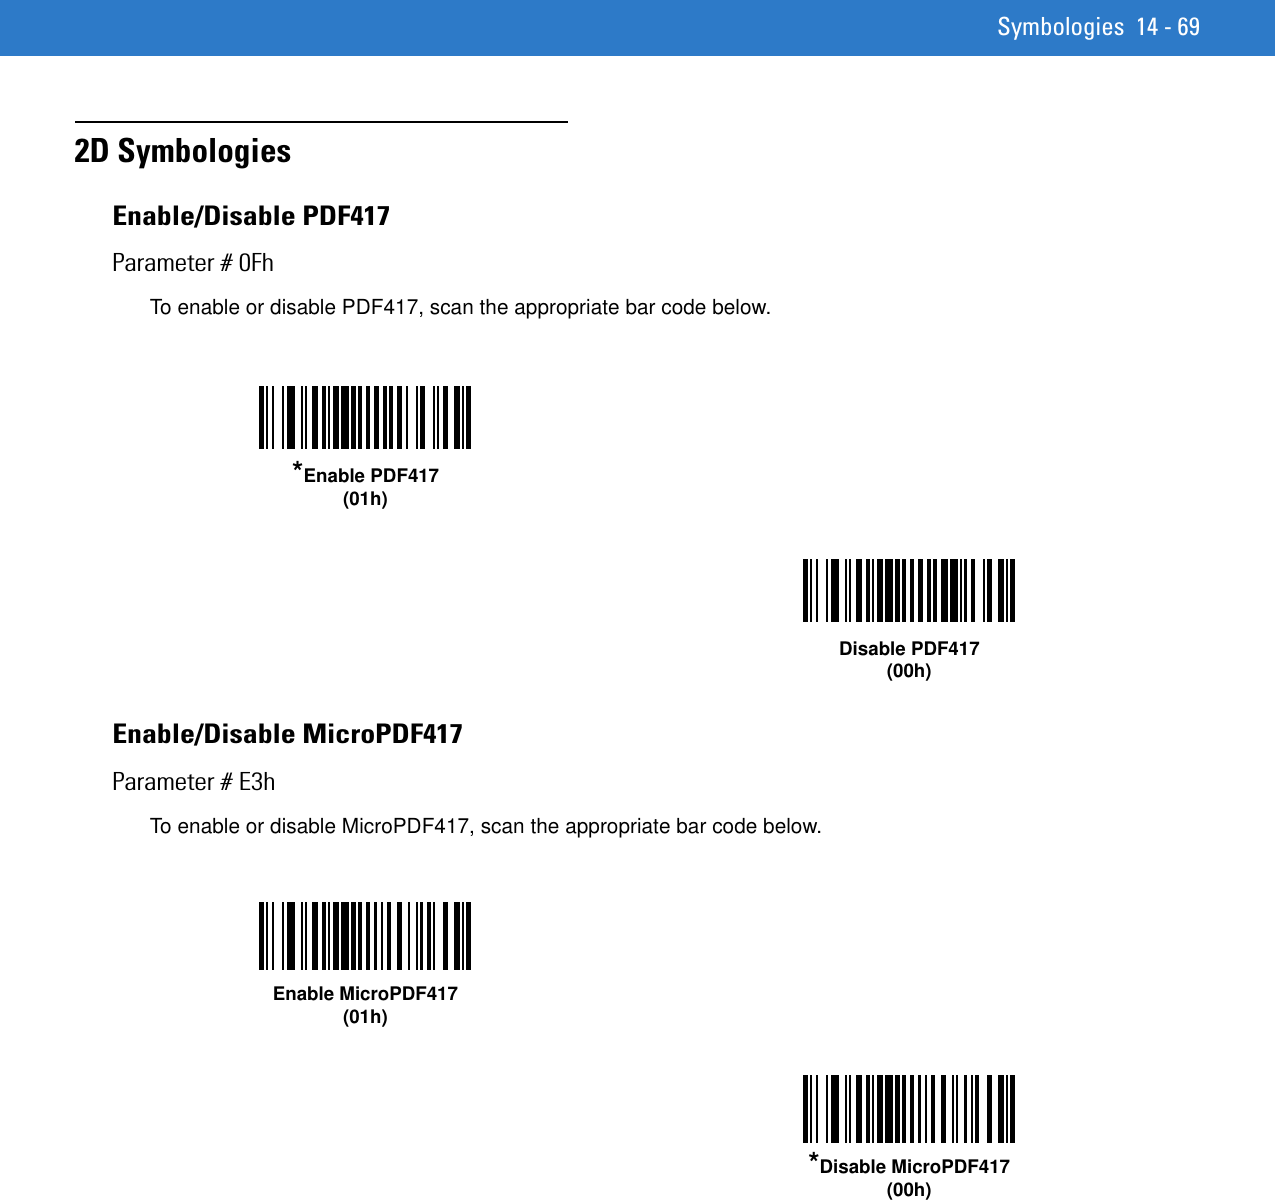 Symbologies 14 - 692D SymbologiesEnable/Disable PDF417Parameter # 0FhTo enable or disable PDF417, scan the appropriate bar code below. Enable/Disable MicroPDF417Parameter # E3hTo enable or disable MicroPDF417, scan the appropriate bar code below. *Enable PDF417(01h)Disable PDF417(00h)Enable MicroPDF417(01h)*Disable MicroPDF417(00h)